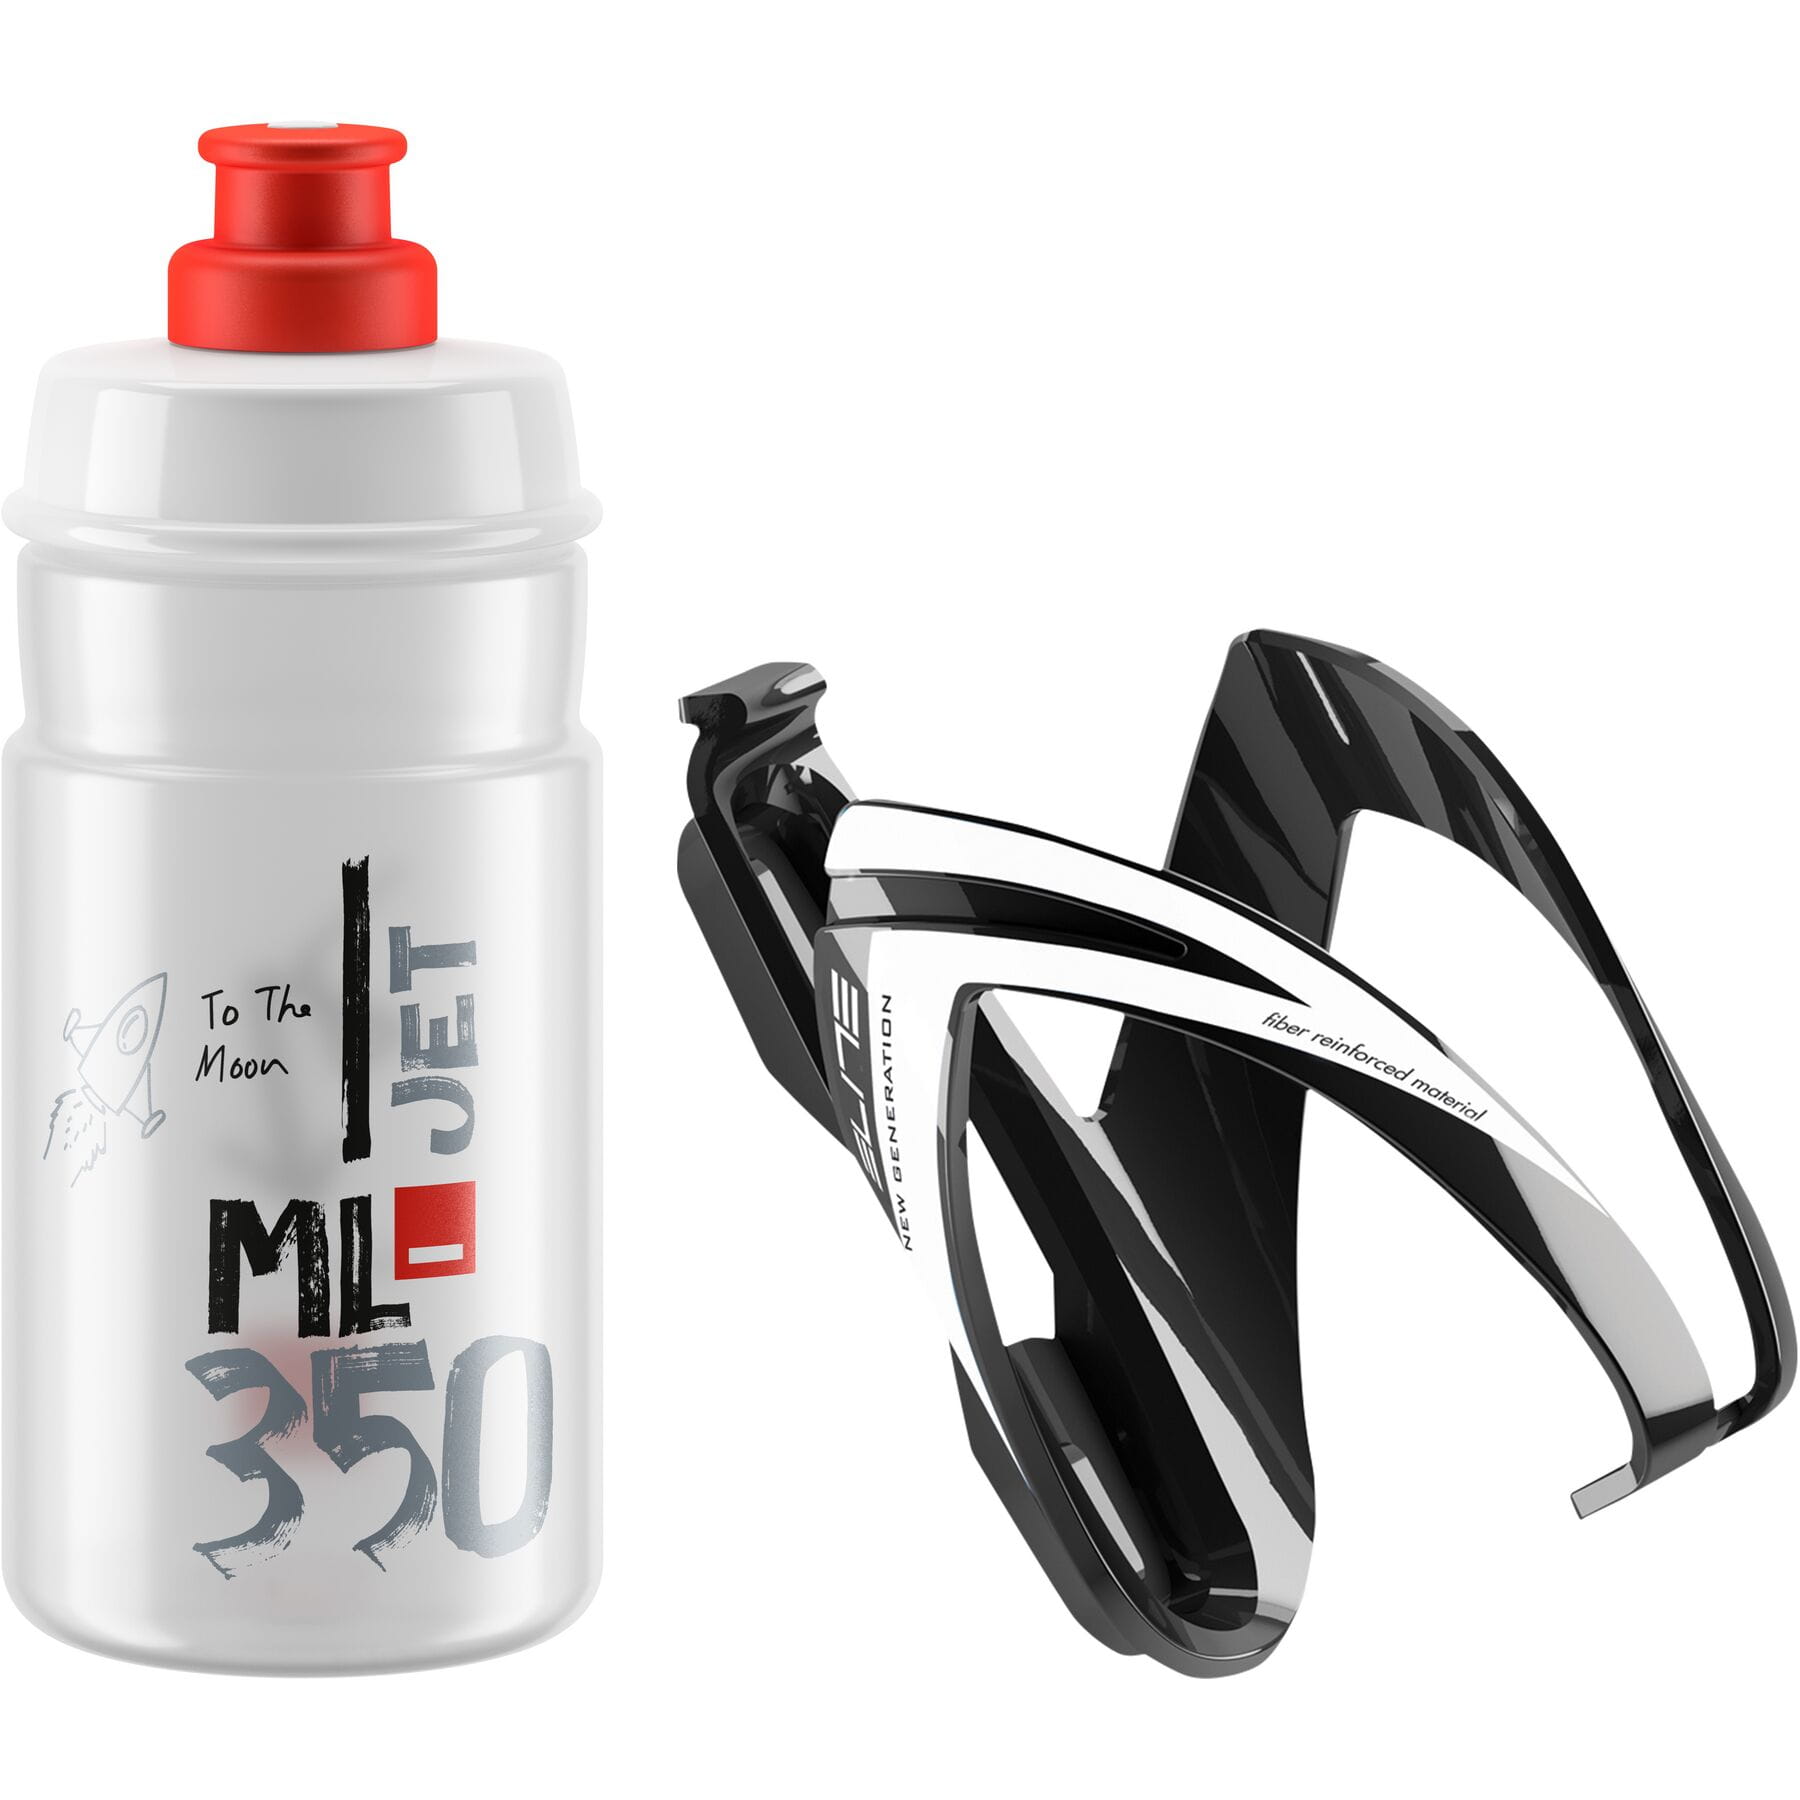 Elite Ceo Jet youth bottle kit includes cage and 66 mm